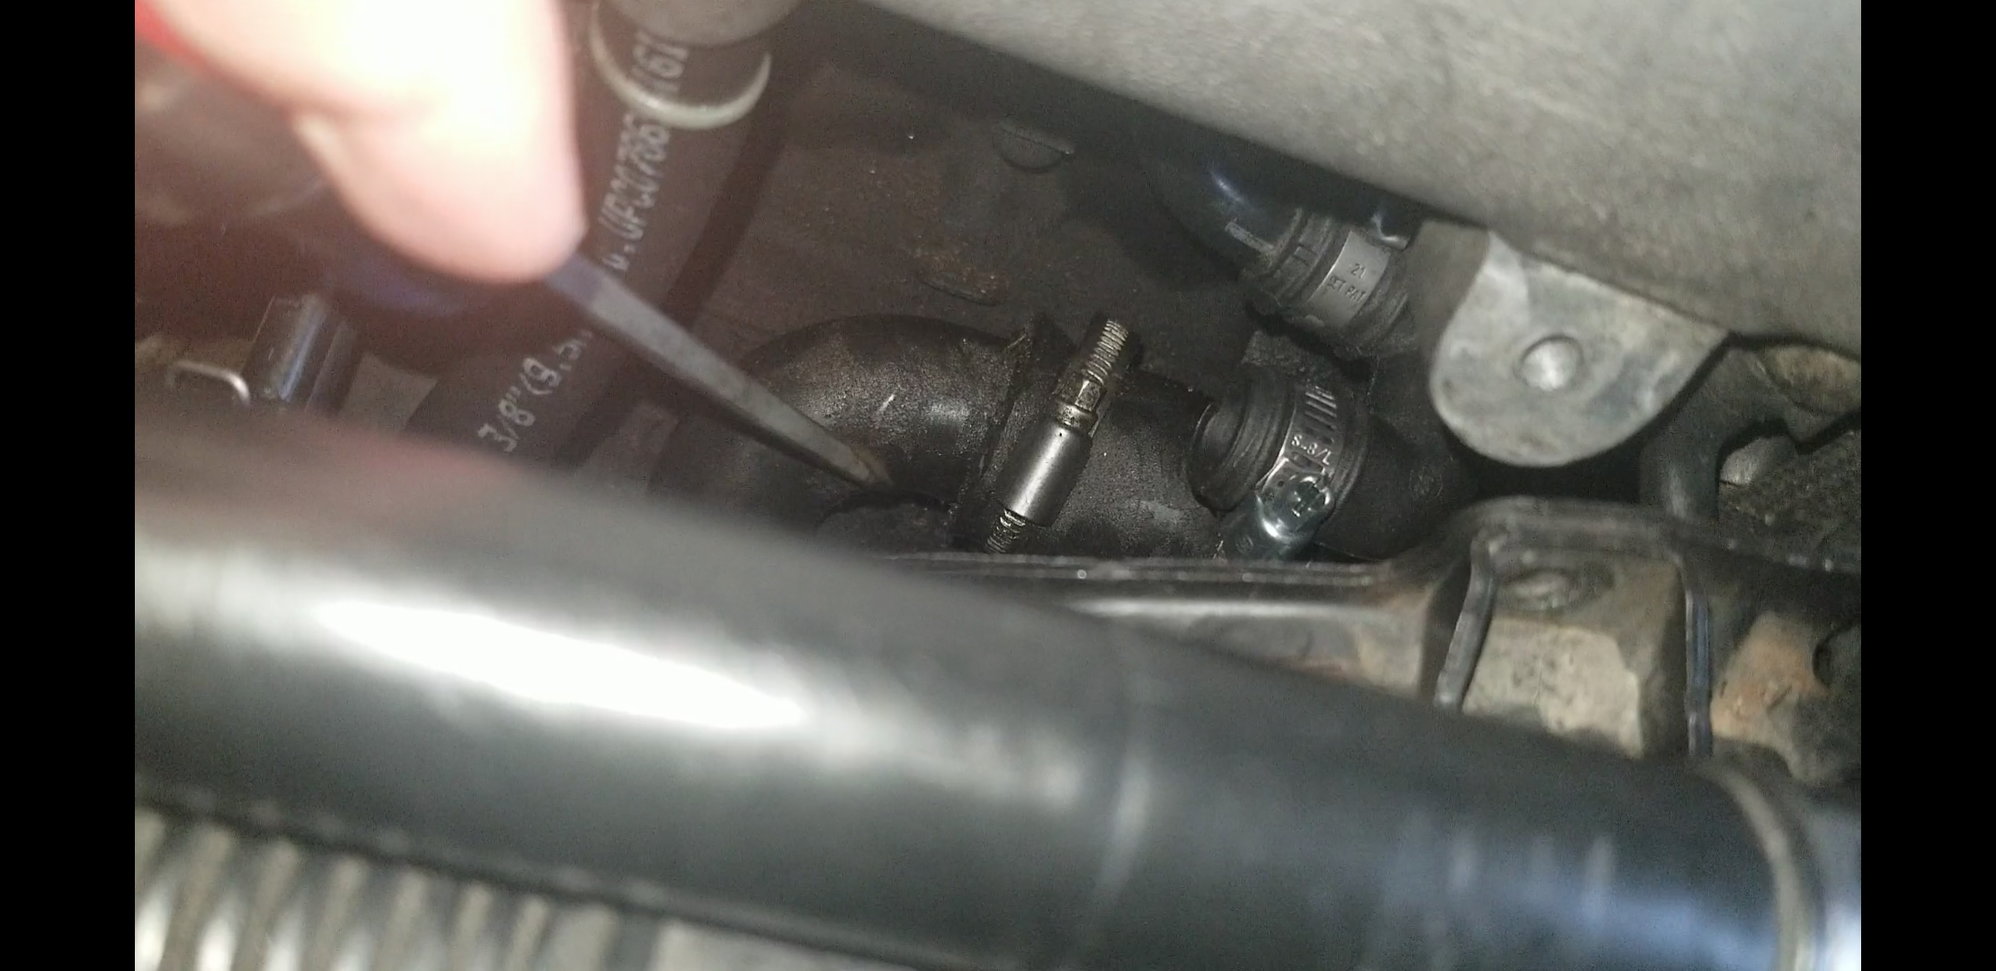 Help Identifying Parts For Replacement? - AudiWorld Forums